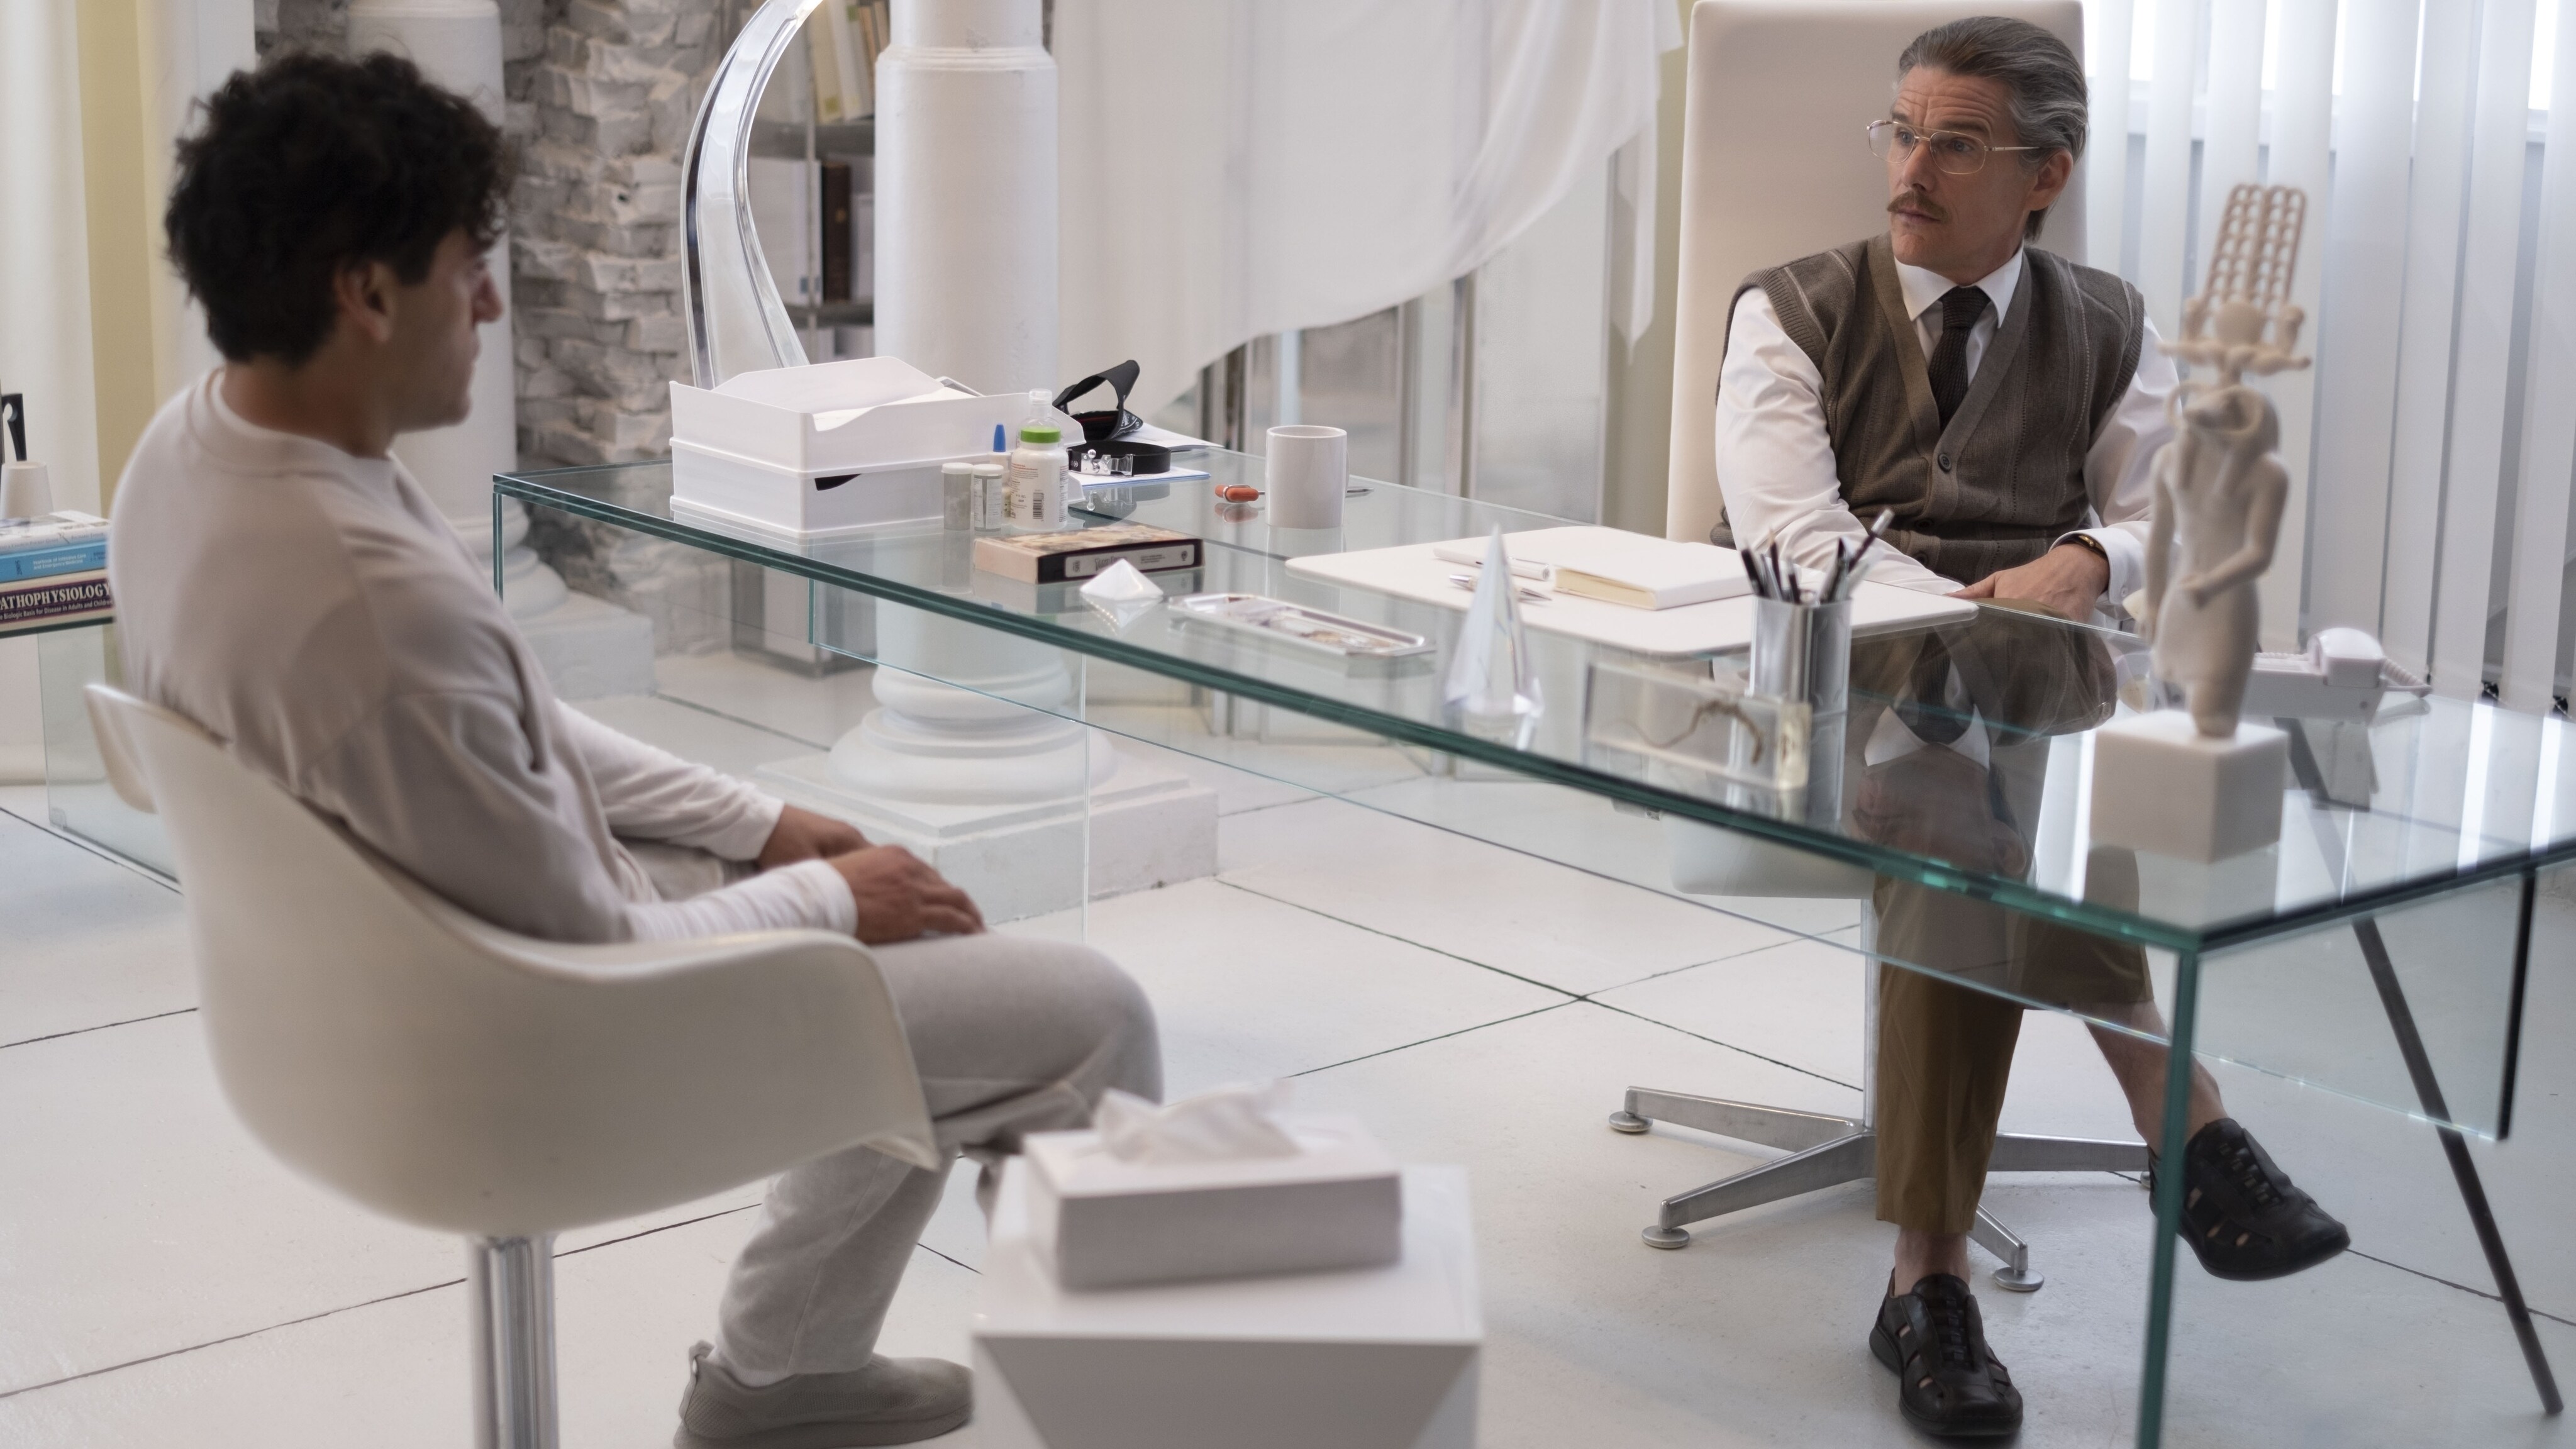 (L-R): Oscar Isaac as Marc Spector and Ethan Hawke as Arthur Harrow in Marvel Studios' MOON KNIGHT, exclusively on Disney+. Photo by Gabor Kotschy. ©Marvel Studios 2022. All Rights Reserved.